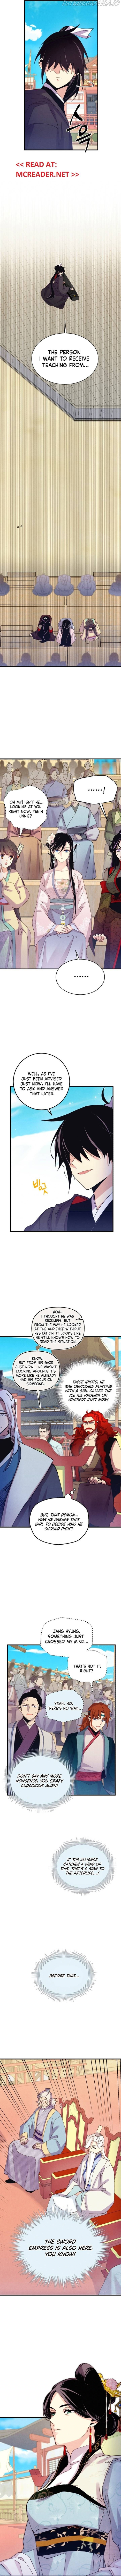 Lightning Degree Chapter 130 page 4 - MangaWeebs.in